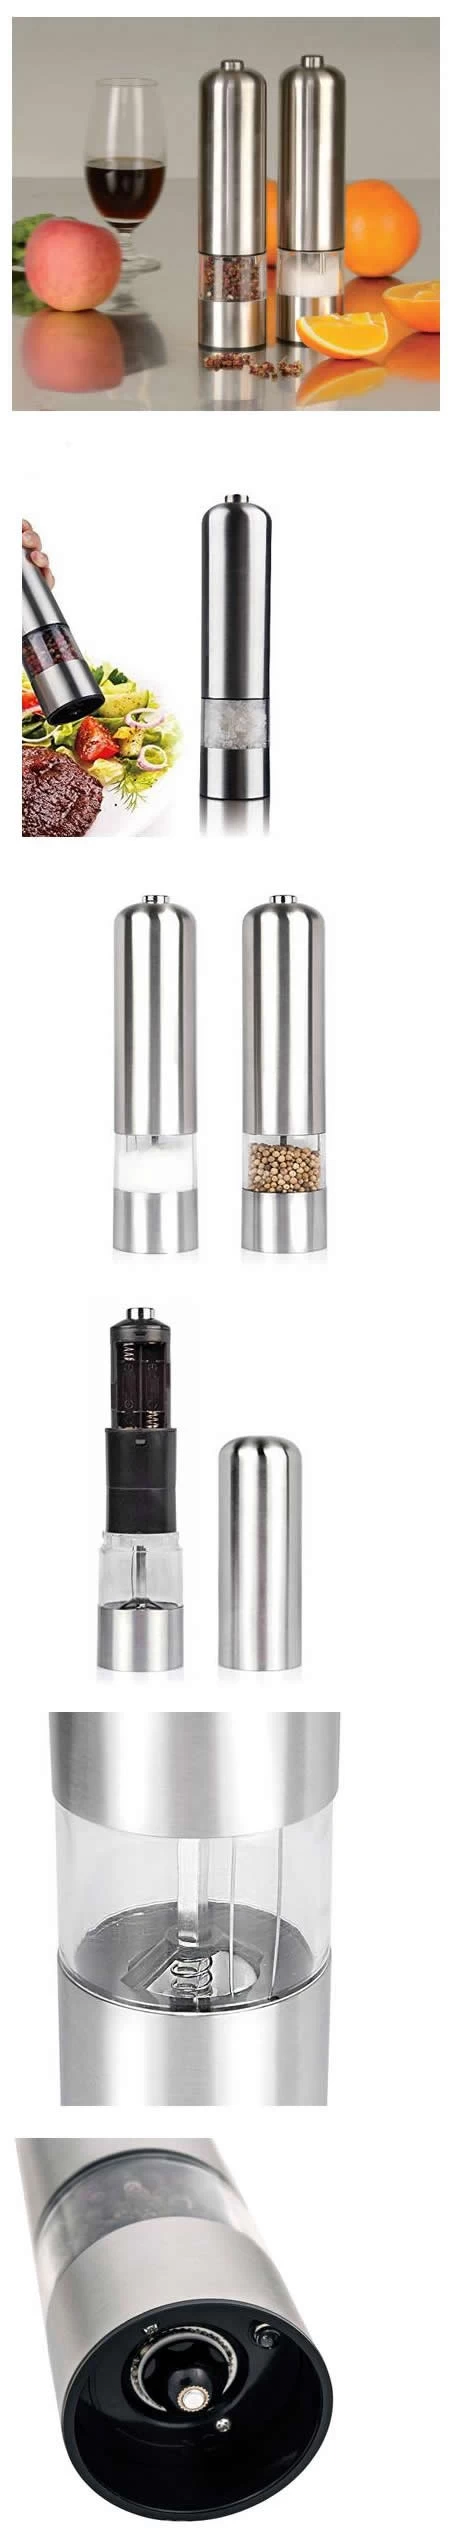 Stainless Steel salt and pepper